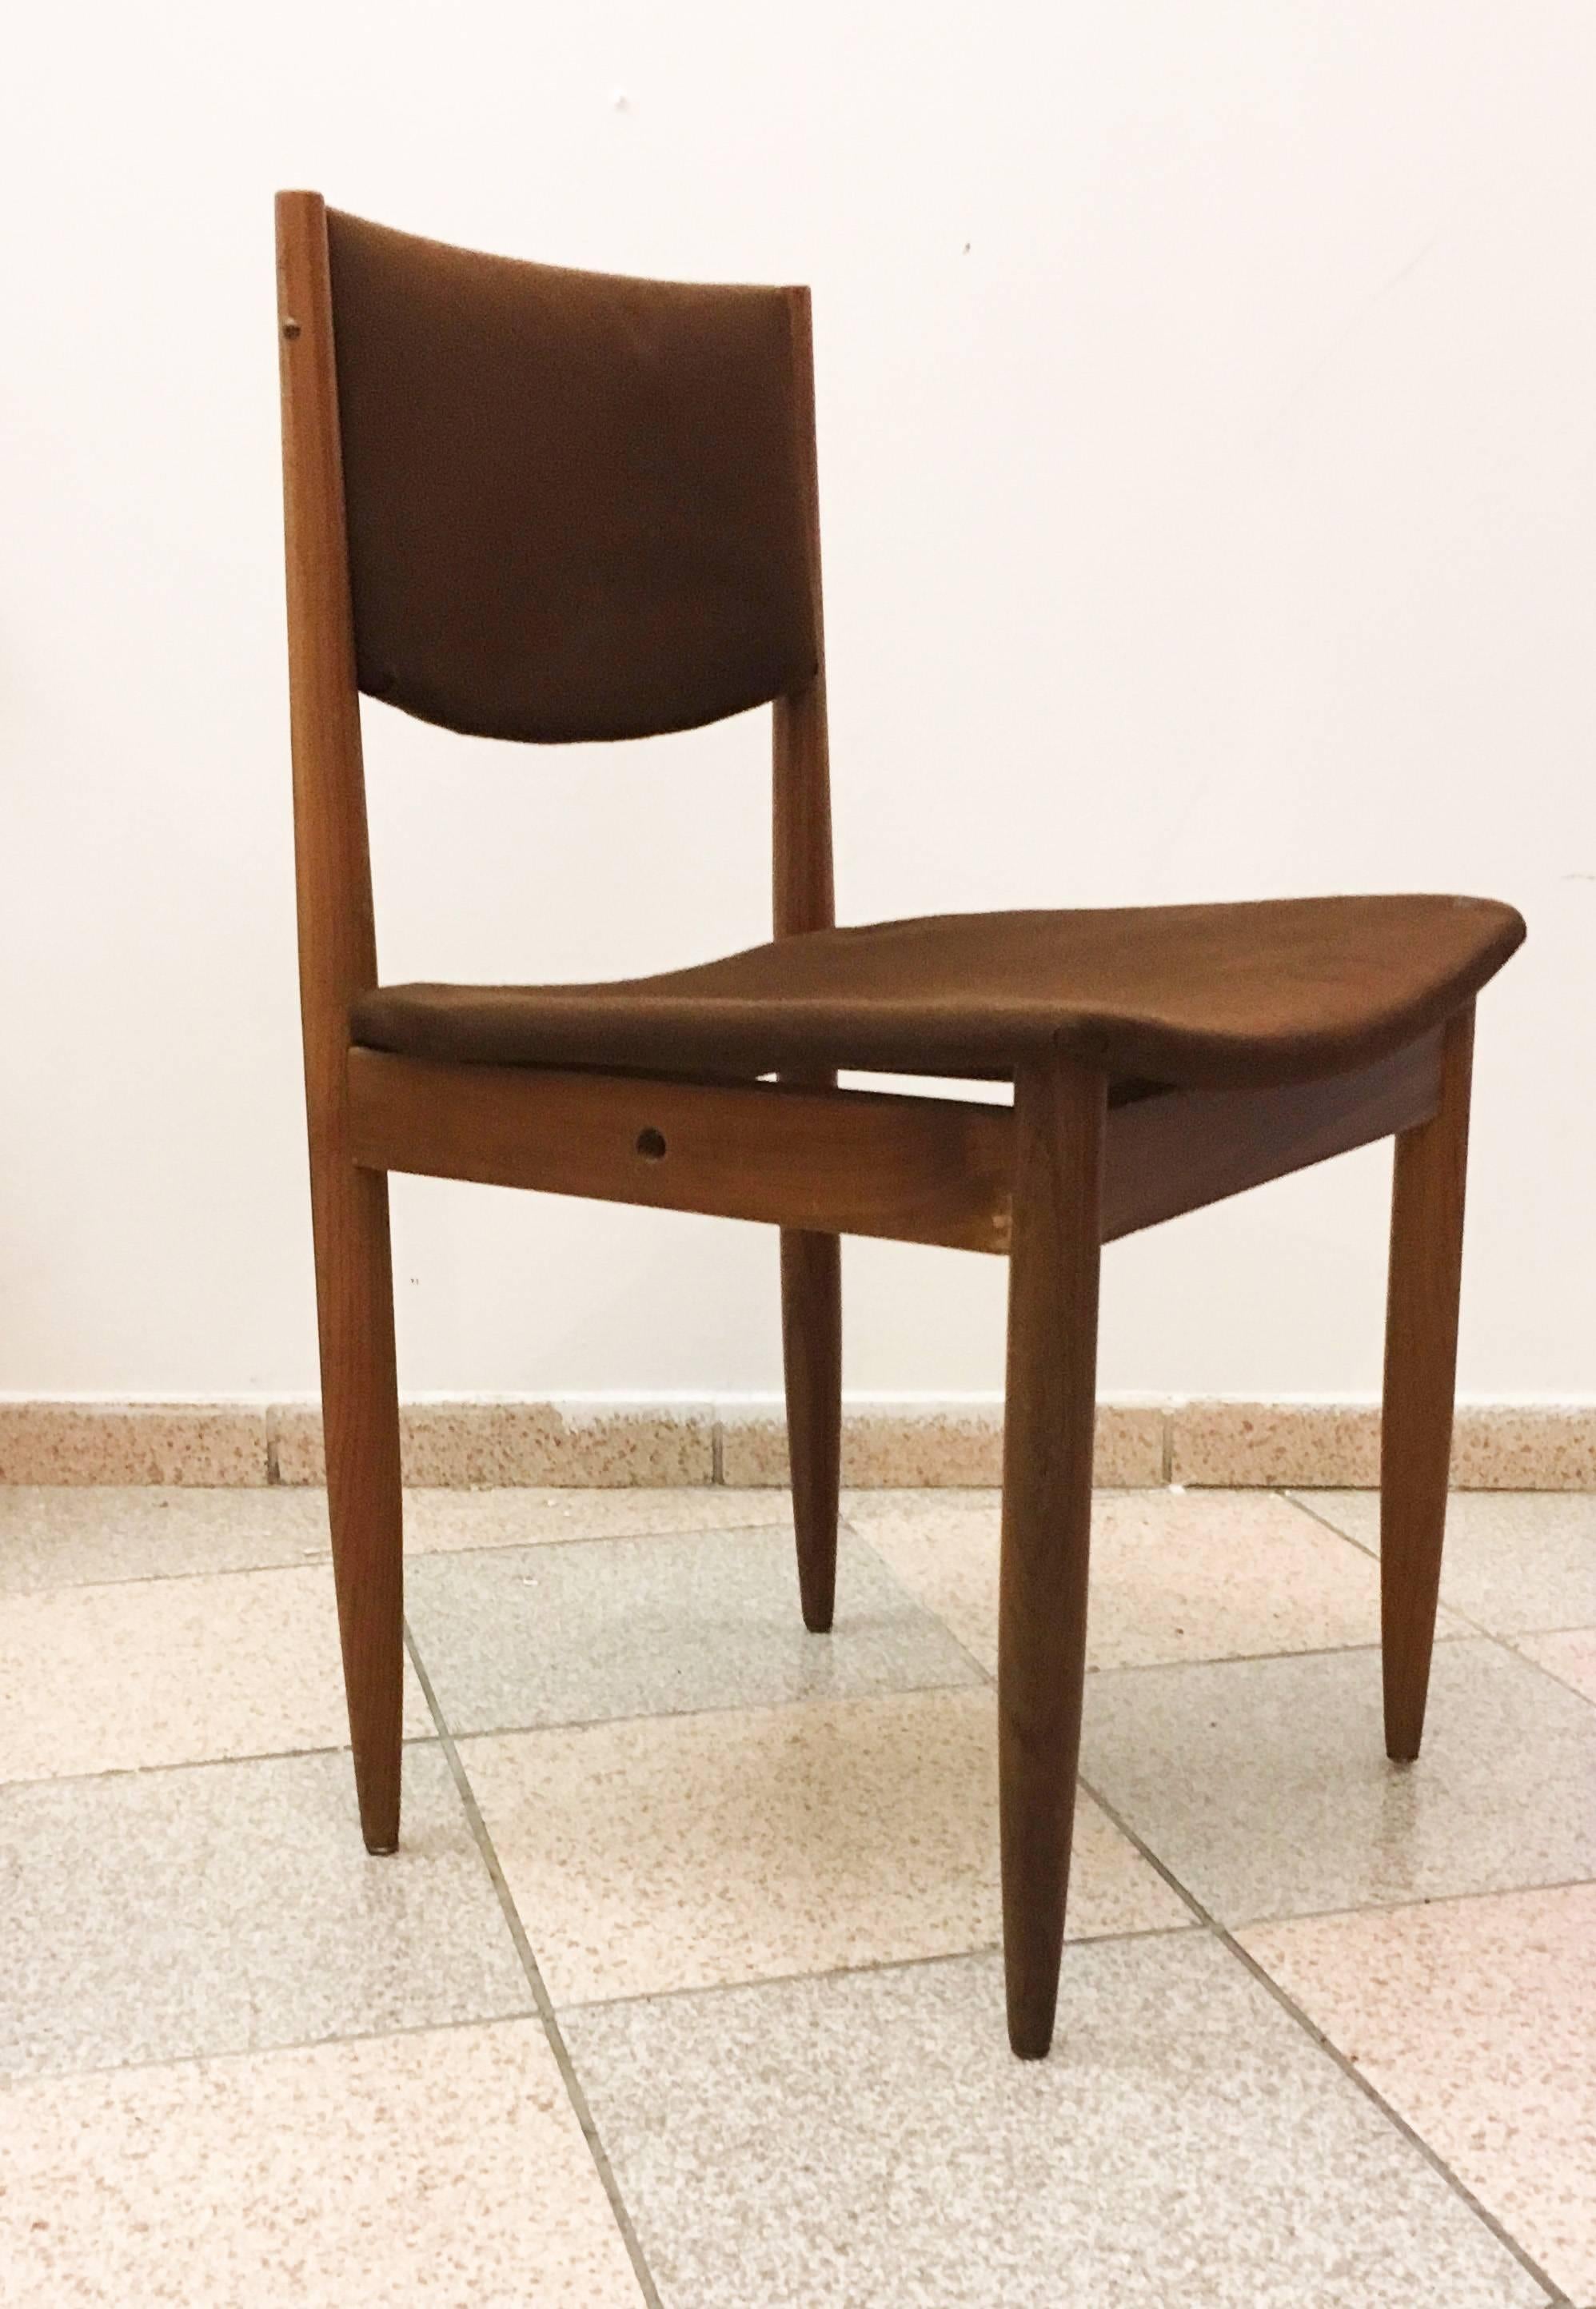 Solid beech construction from the 1950s made by company E & A Pollanck in Austria, the same company which made the chairs for the City Hall of Vienna designed by Roland Rainer. 
Still in original condition, new upholstery necessary and can be made